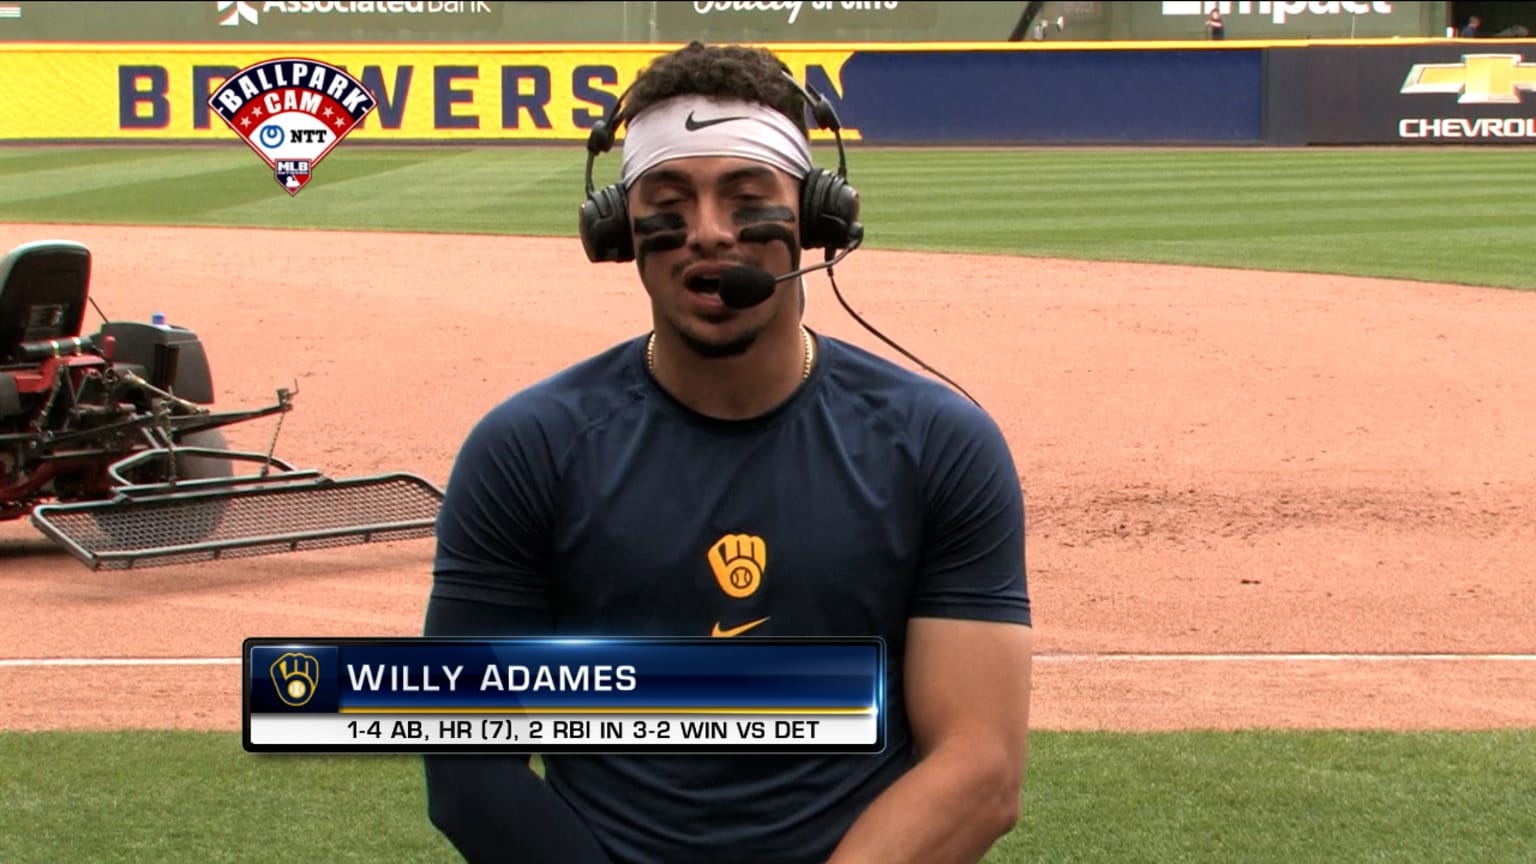 MLB The Show 21 - Willy Adames